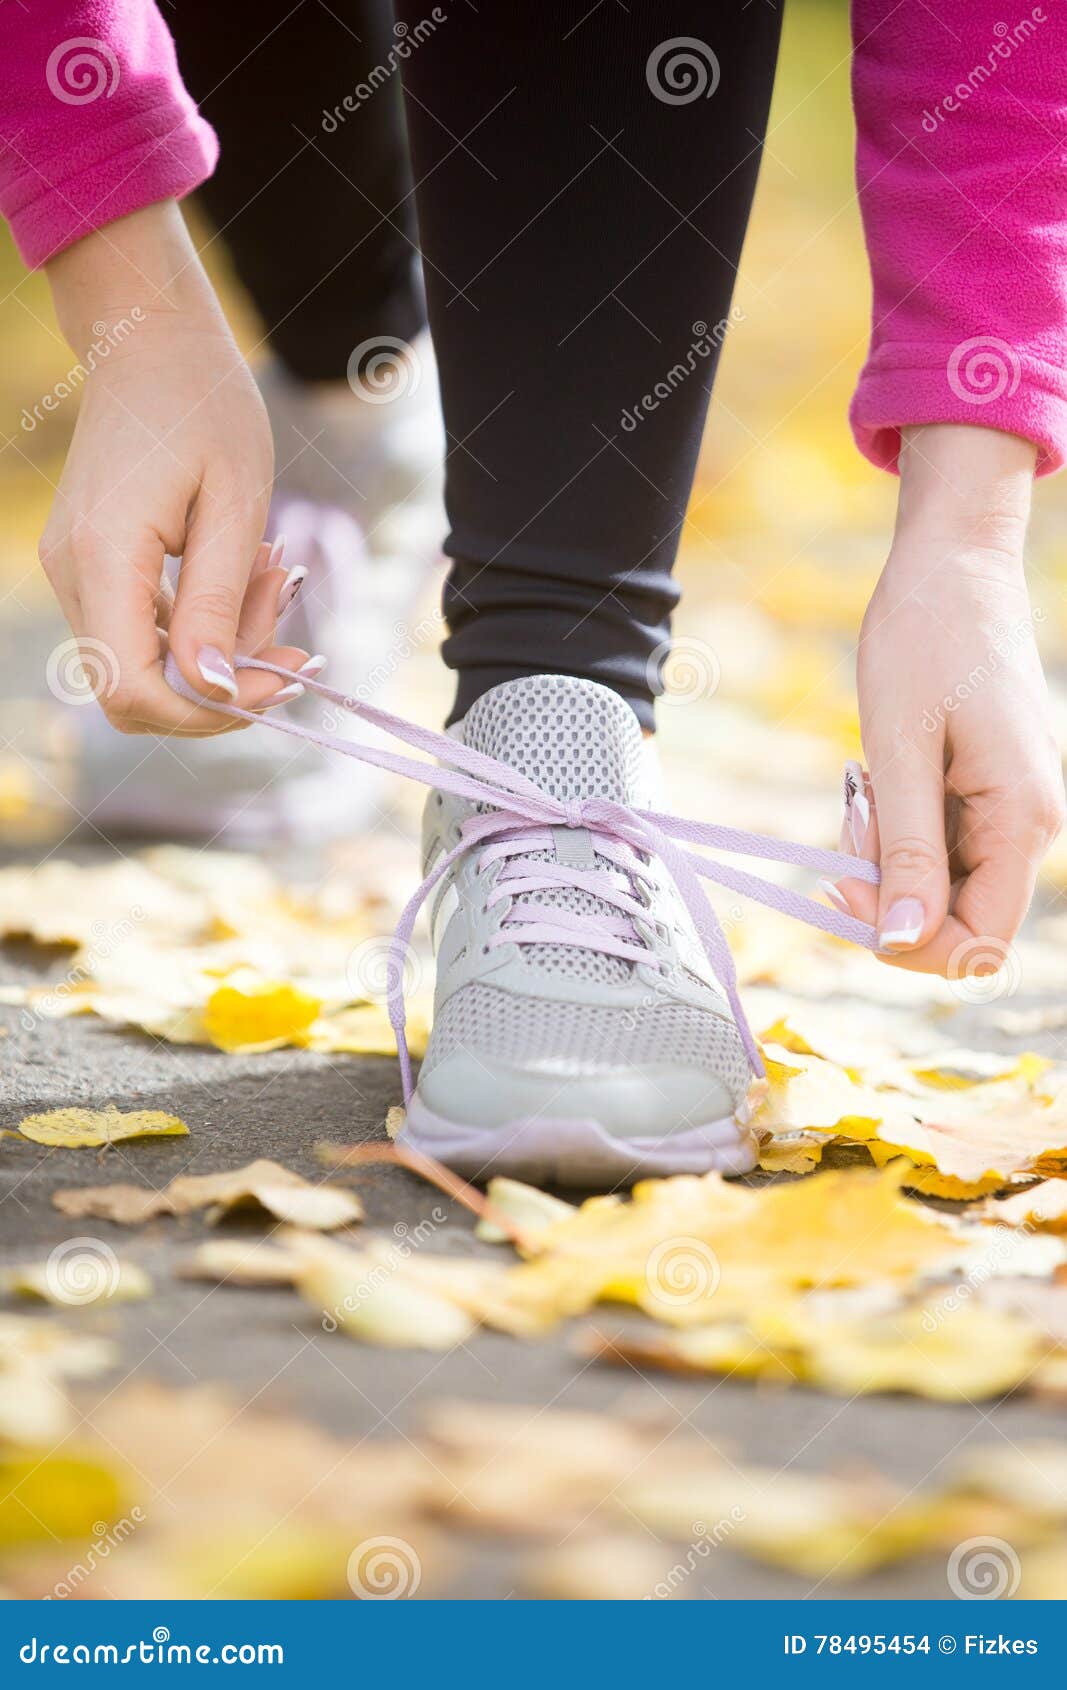 hands tying trainers shoelaces on the fall pave